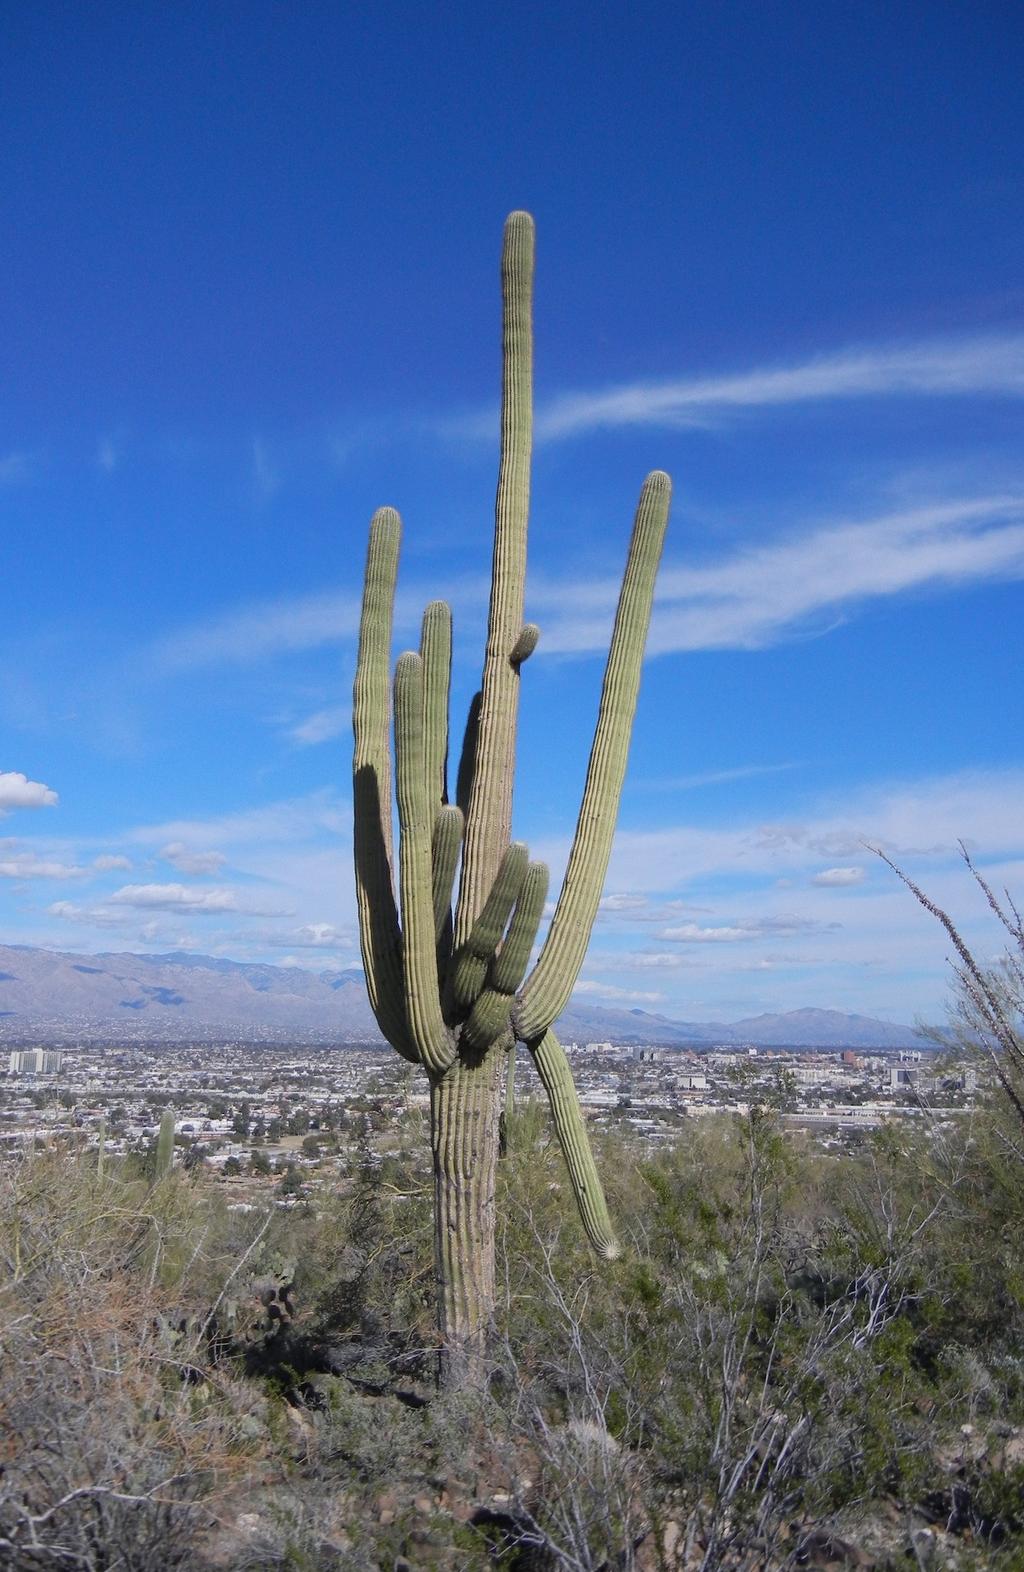 The Saguaro Genome Project In summer 2013 the Universidad Nacional Autonoma de Mexico (UNAM) and the University of Arizona established small grants for research in adaptation and sustainability in